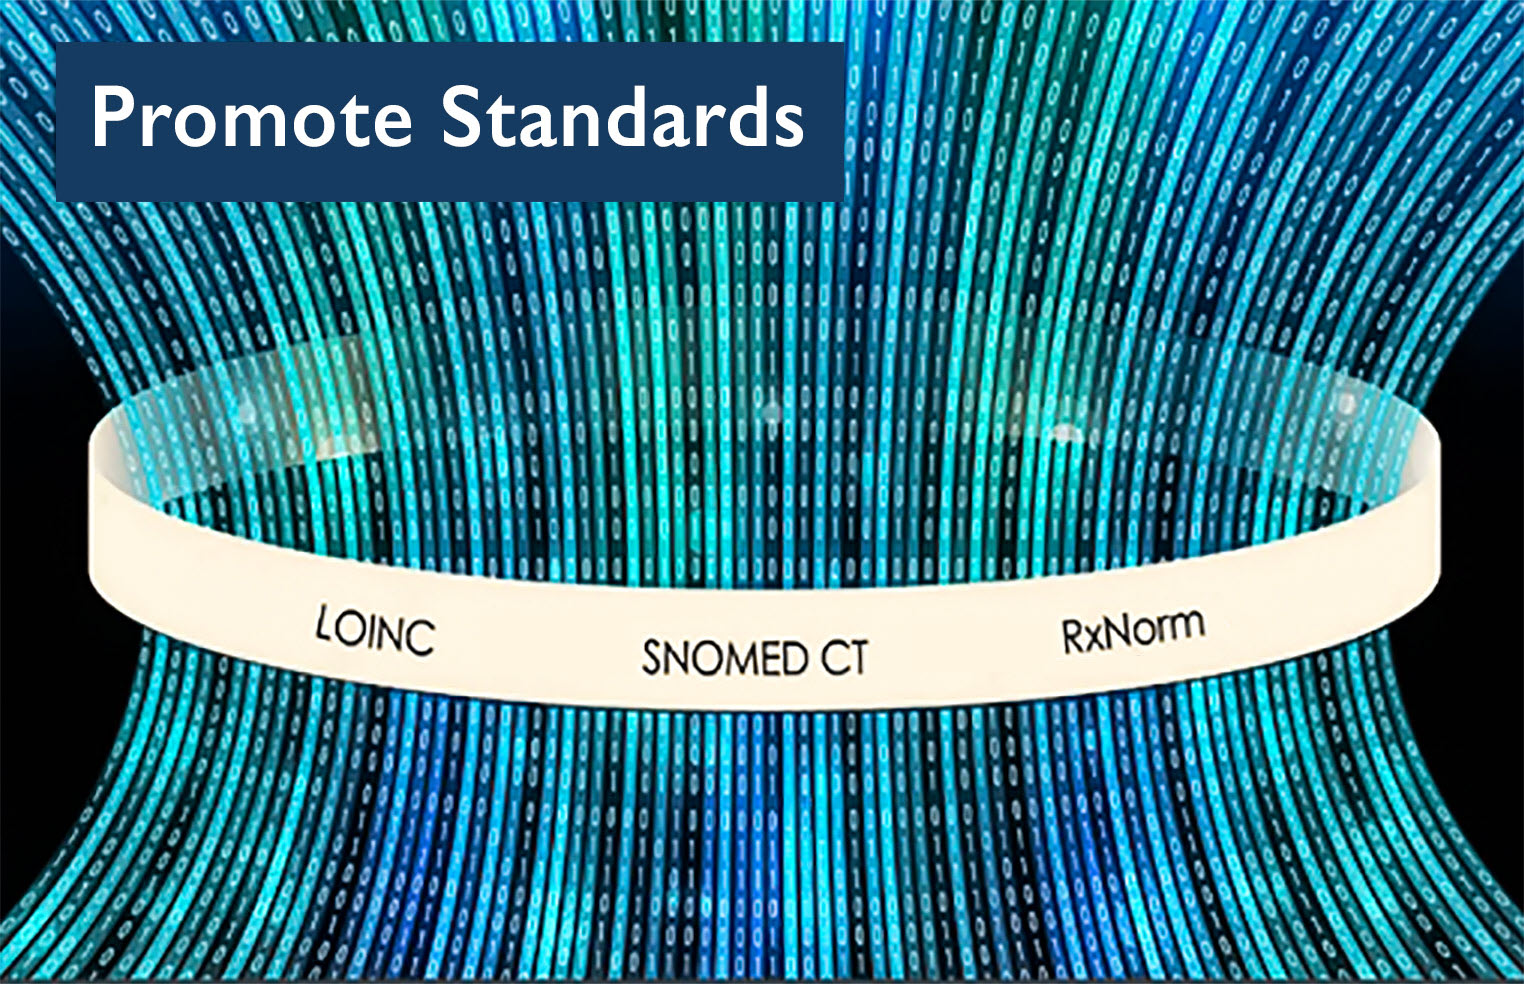 Graphic entitled Promote Standards shows curved blue and green lines bending l through a ring with the three acronyms of NLM offerings: LOINC, SNOMED CT and RxNorm.